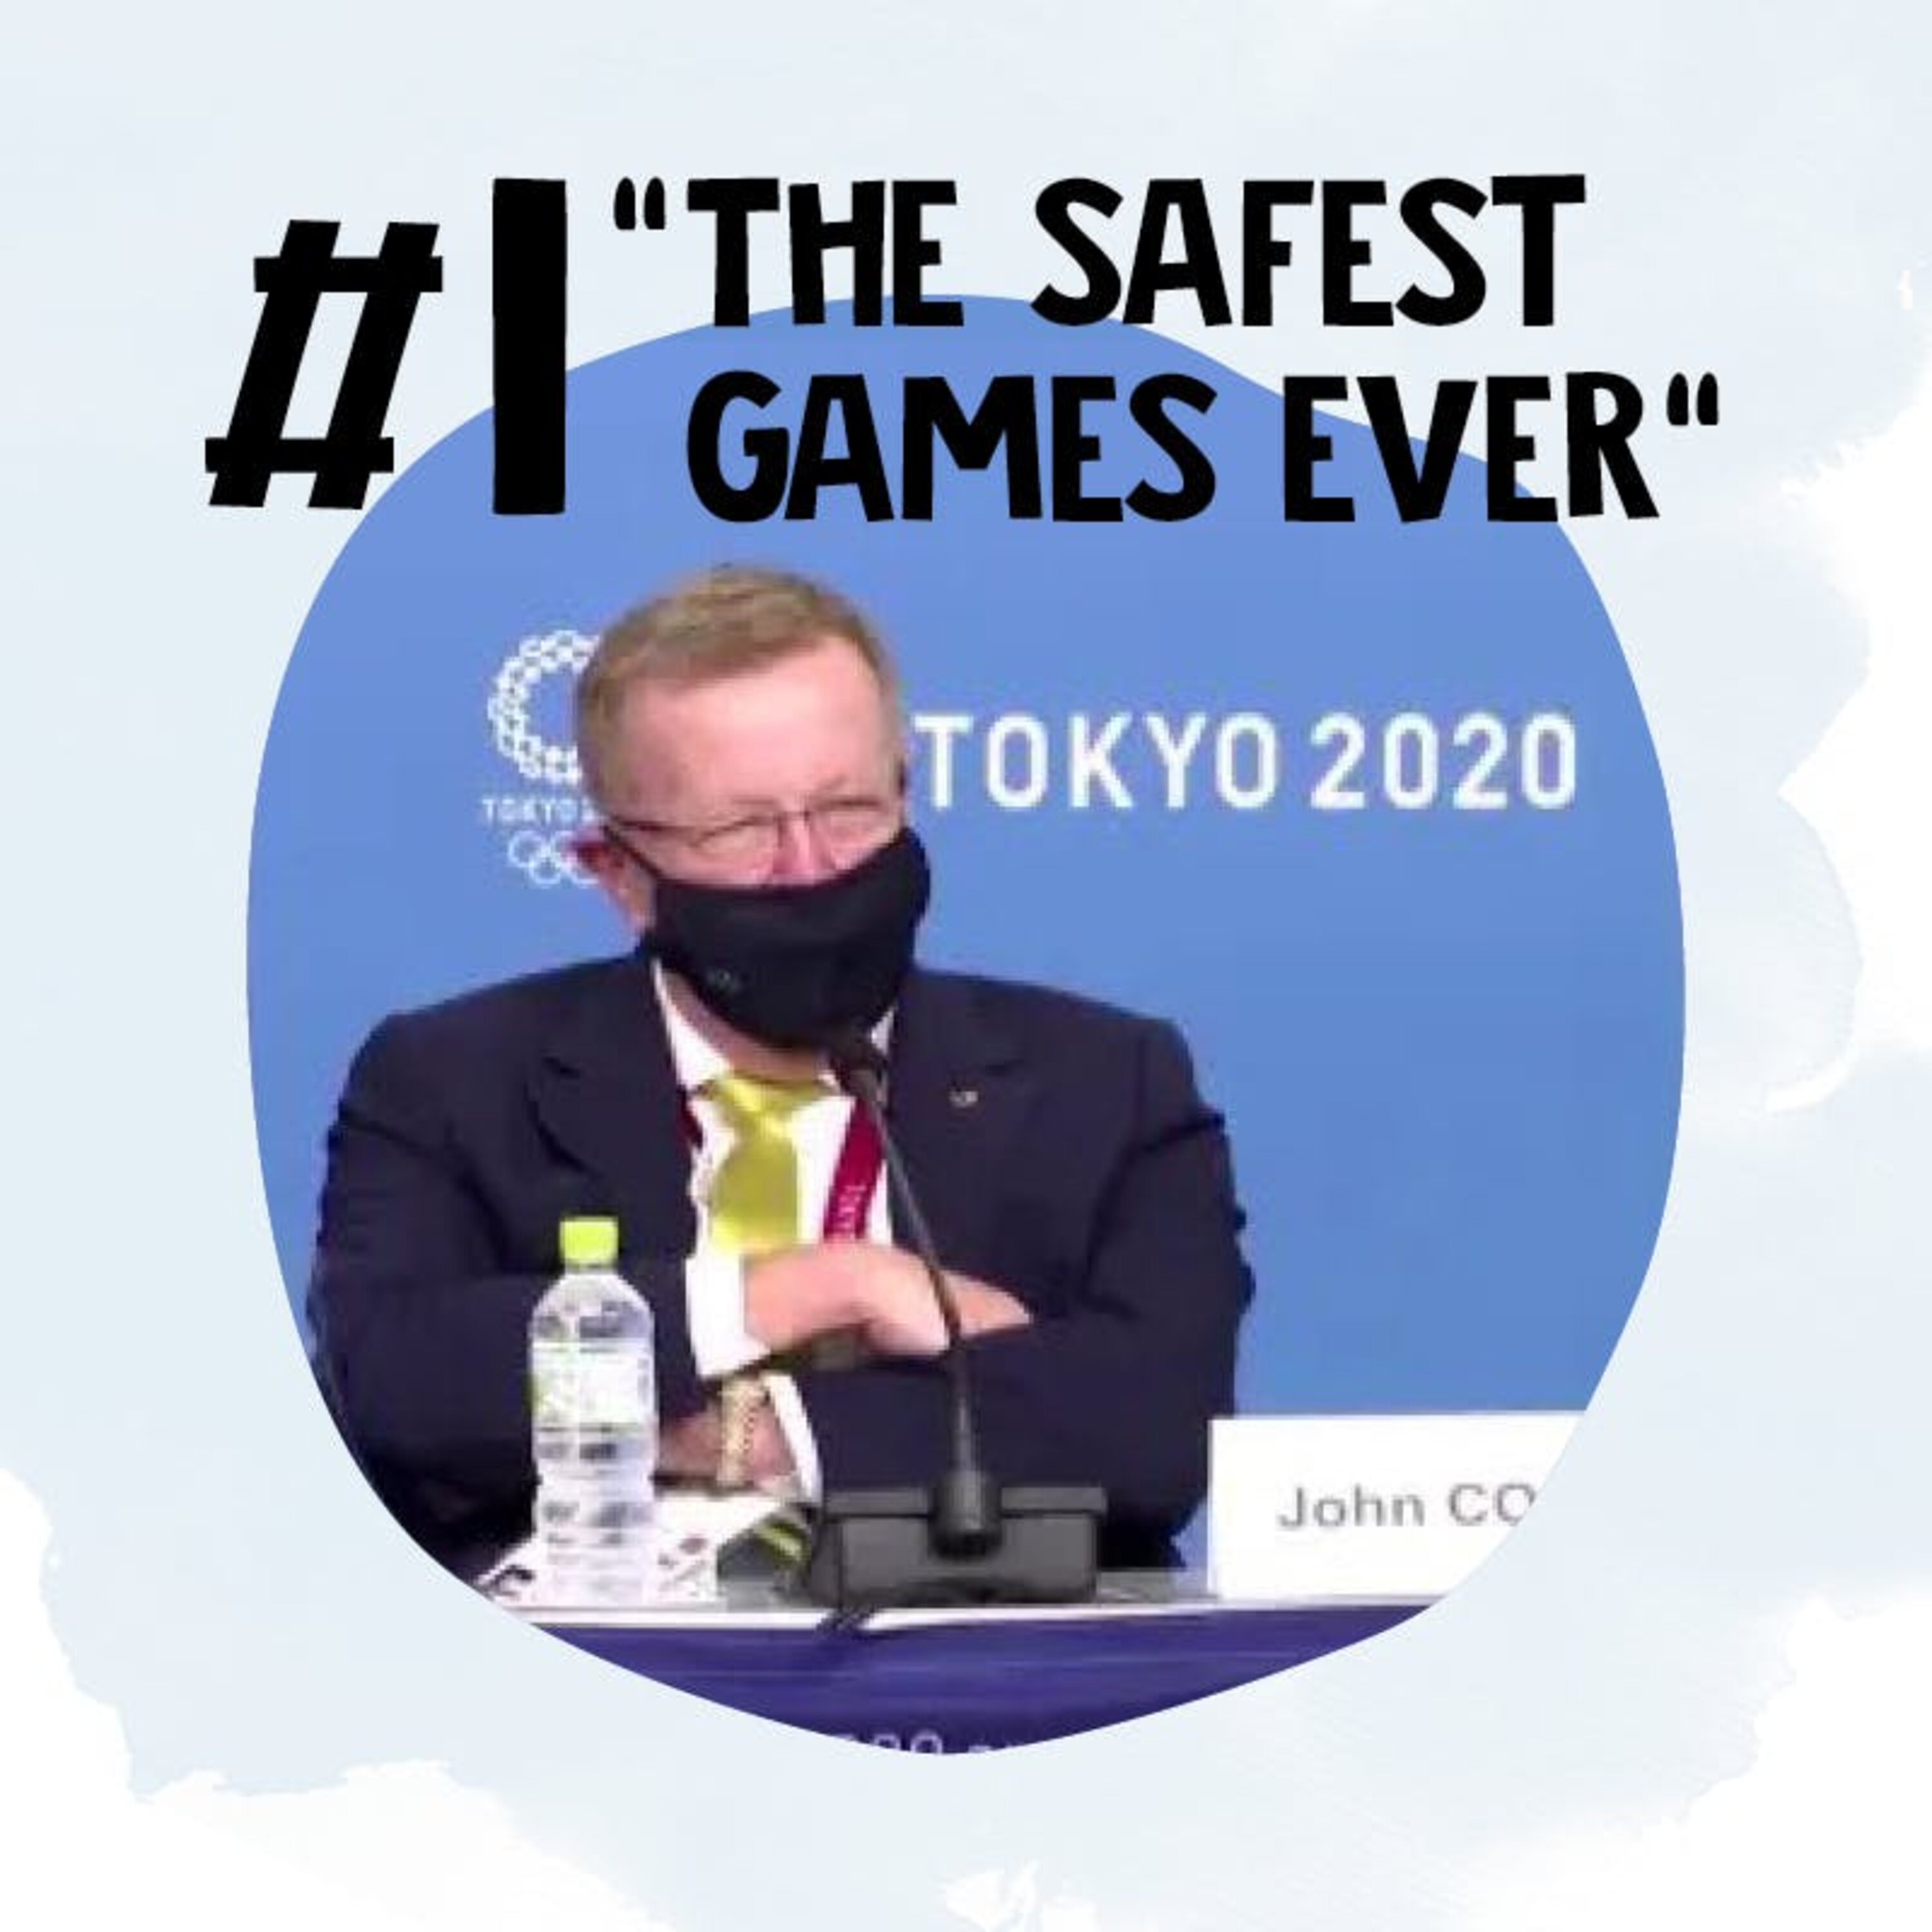 ”The Safest Olympic Games Ever”